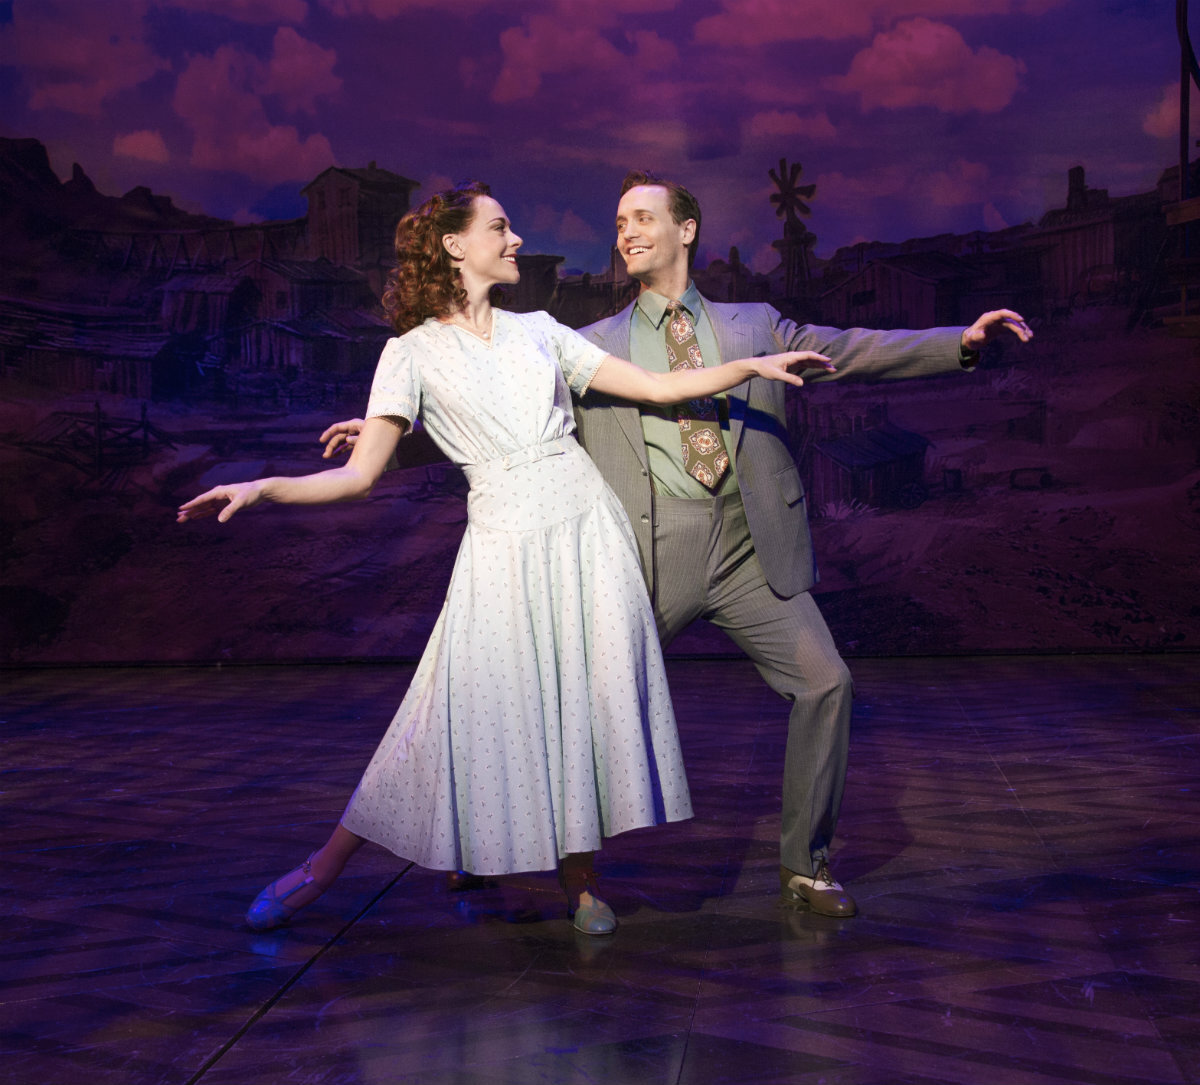  Ashley Spencer as Polly Baker, Danny Gardner as Bobby Child in Crazy for You at Signature Theatre. Photo: C. Stanley  